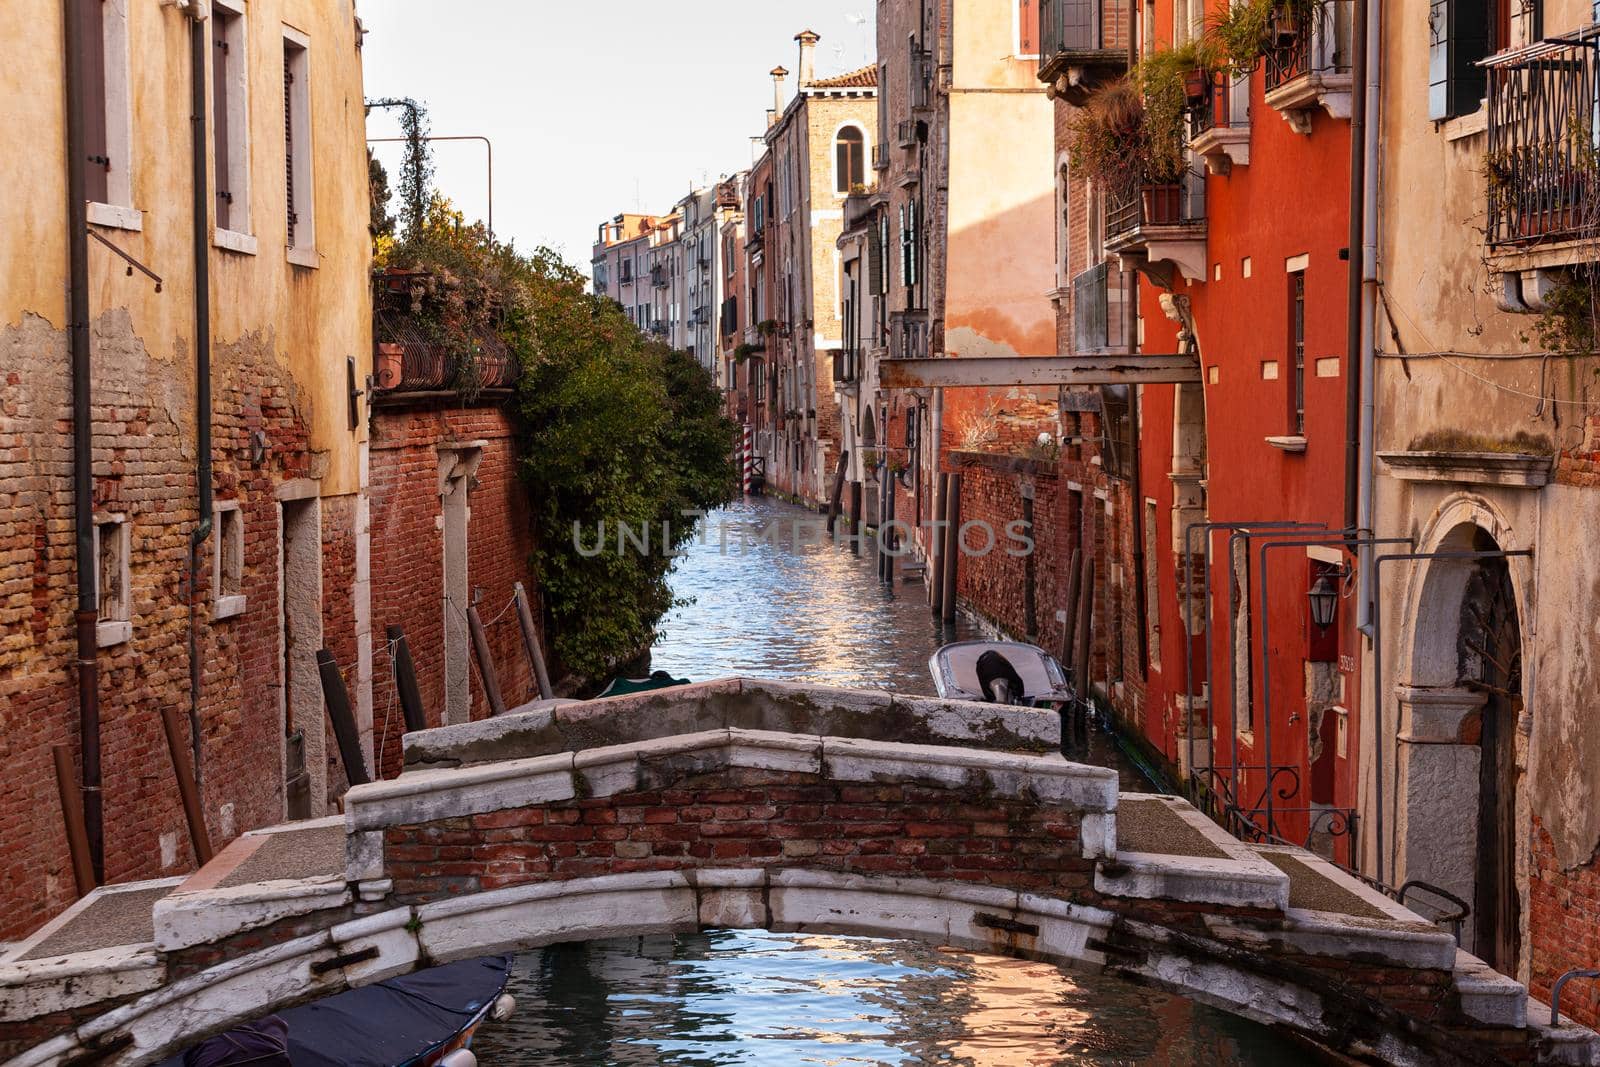 The old bridge made with red bricks on the typical canal in Venice by bepsimage